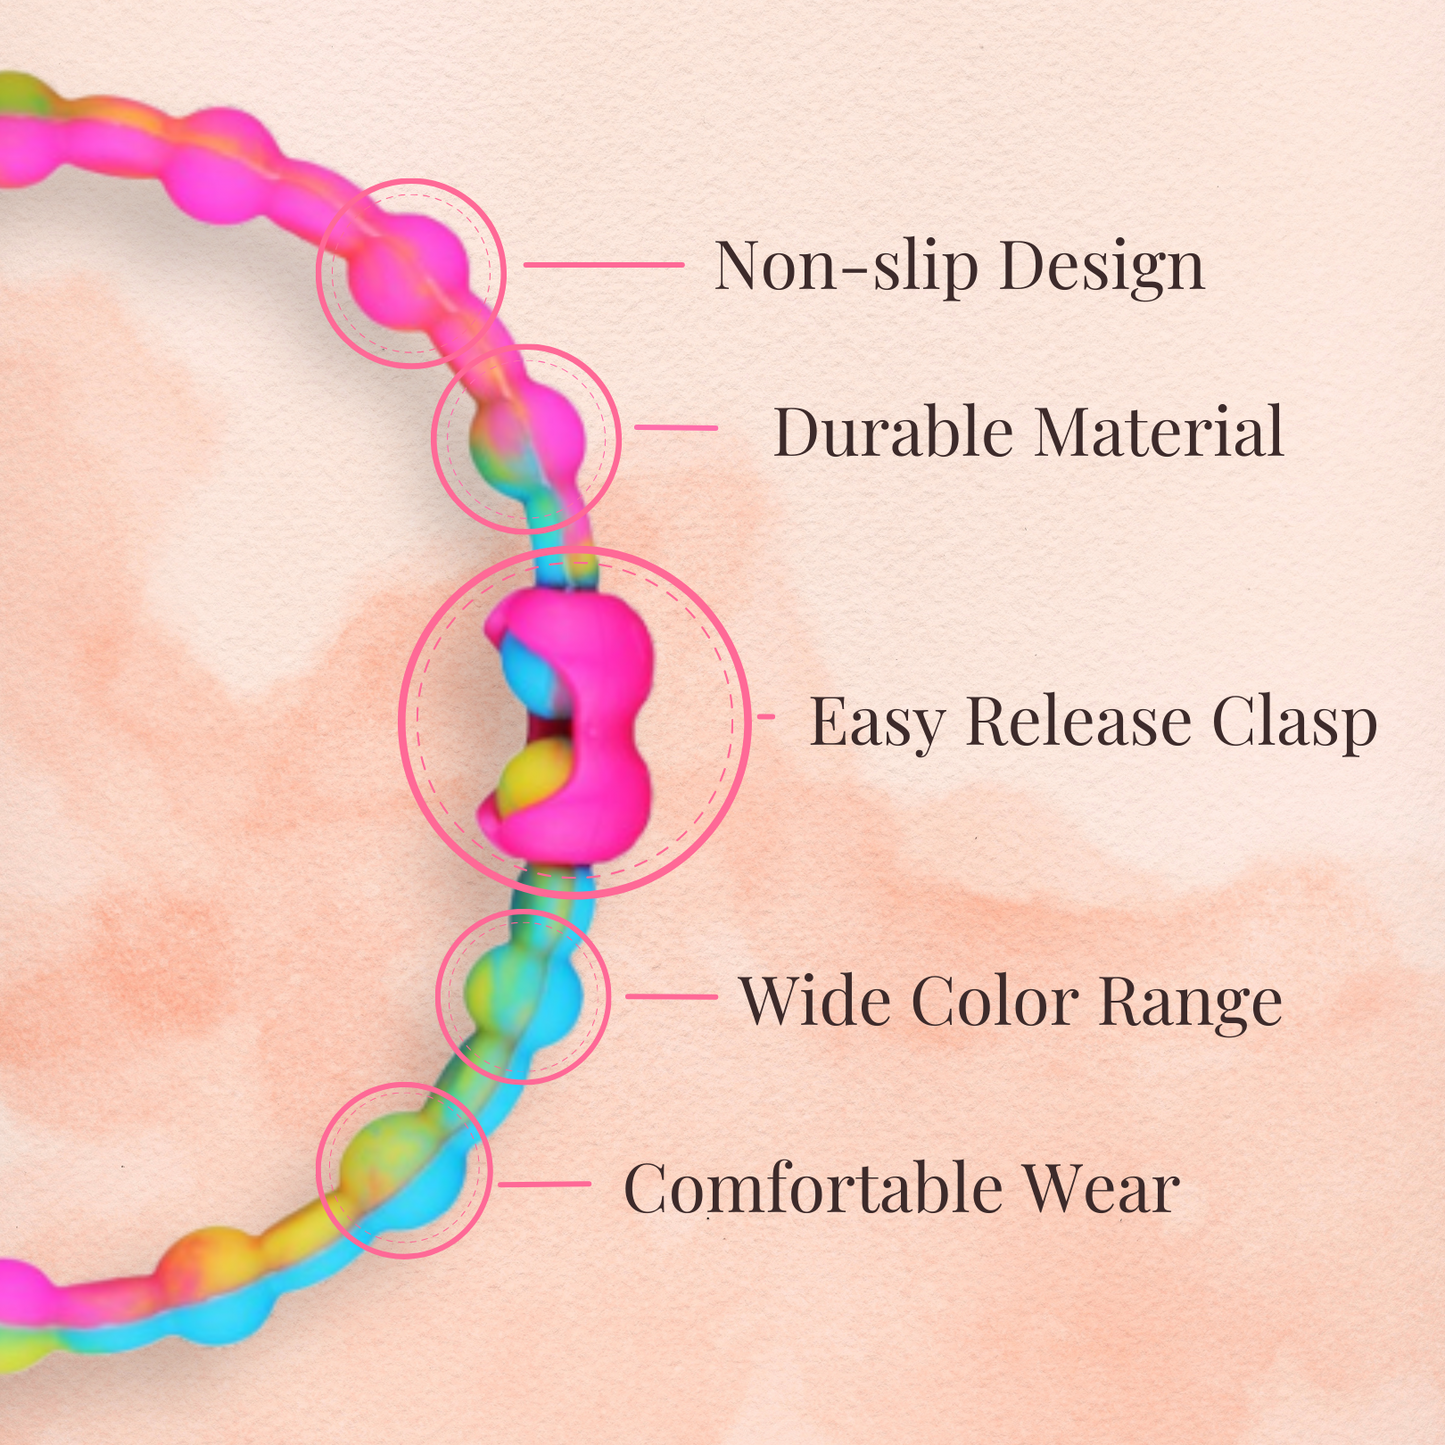 Harbor Mist Pack PRO Hair Ties (4-Pack): Effortless Style for Every Occasion